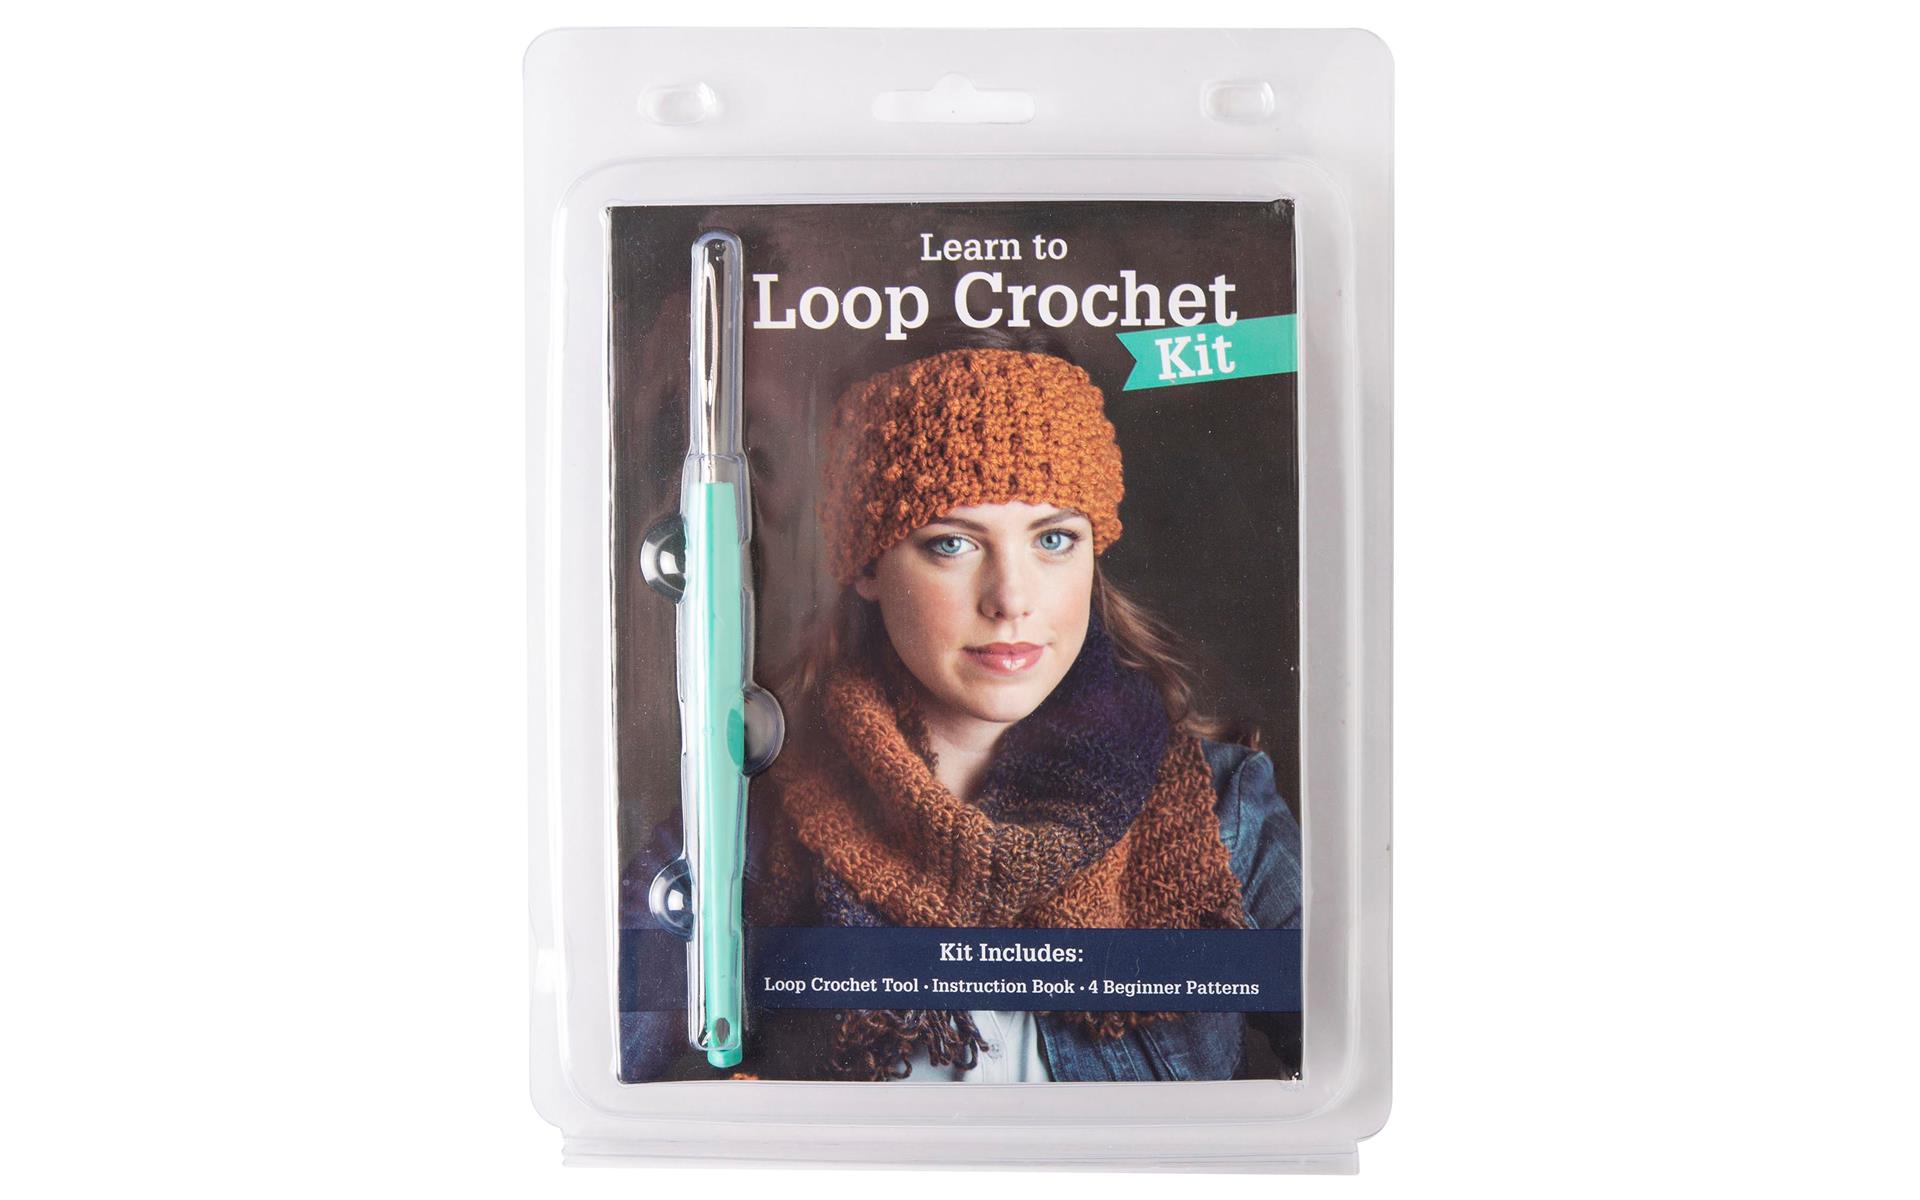 Leisure Arts Learn to Loop Crochet Kit: Crochet set for Beginners Create  Knit Stitches with One Tool - Includes one loop crochet tool one  instruction book and four beginner patterns.